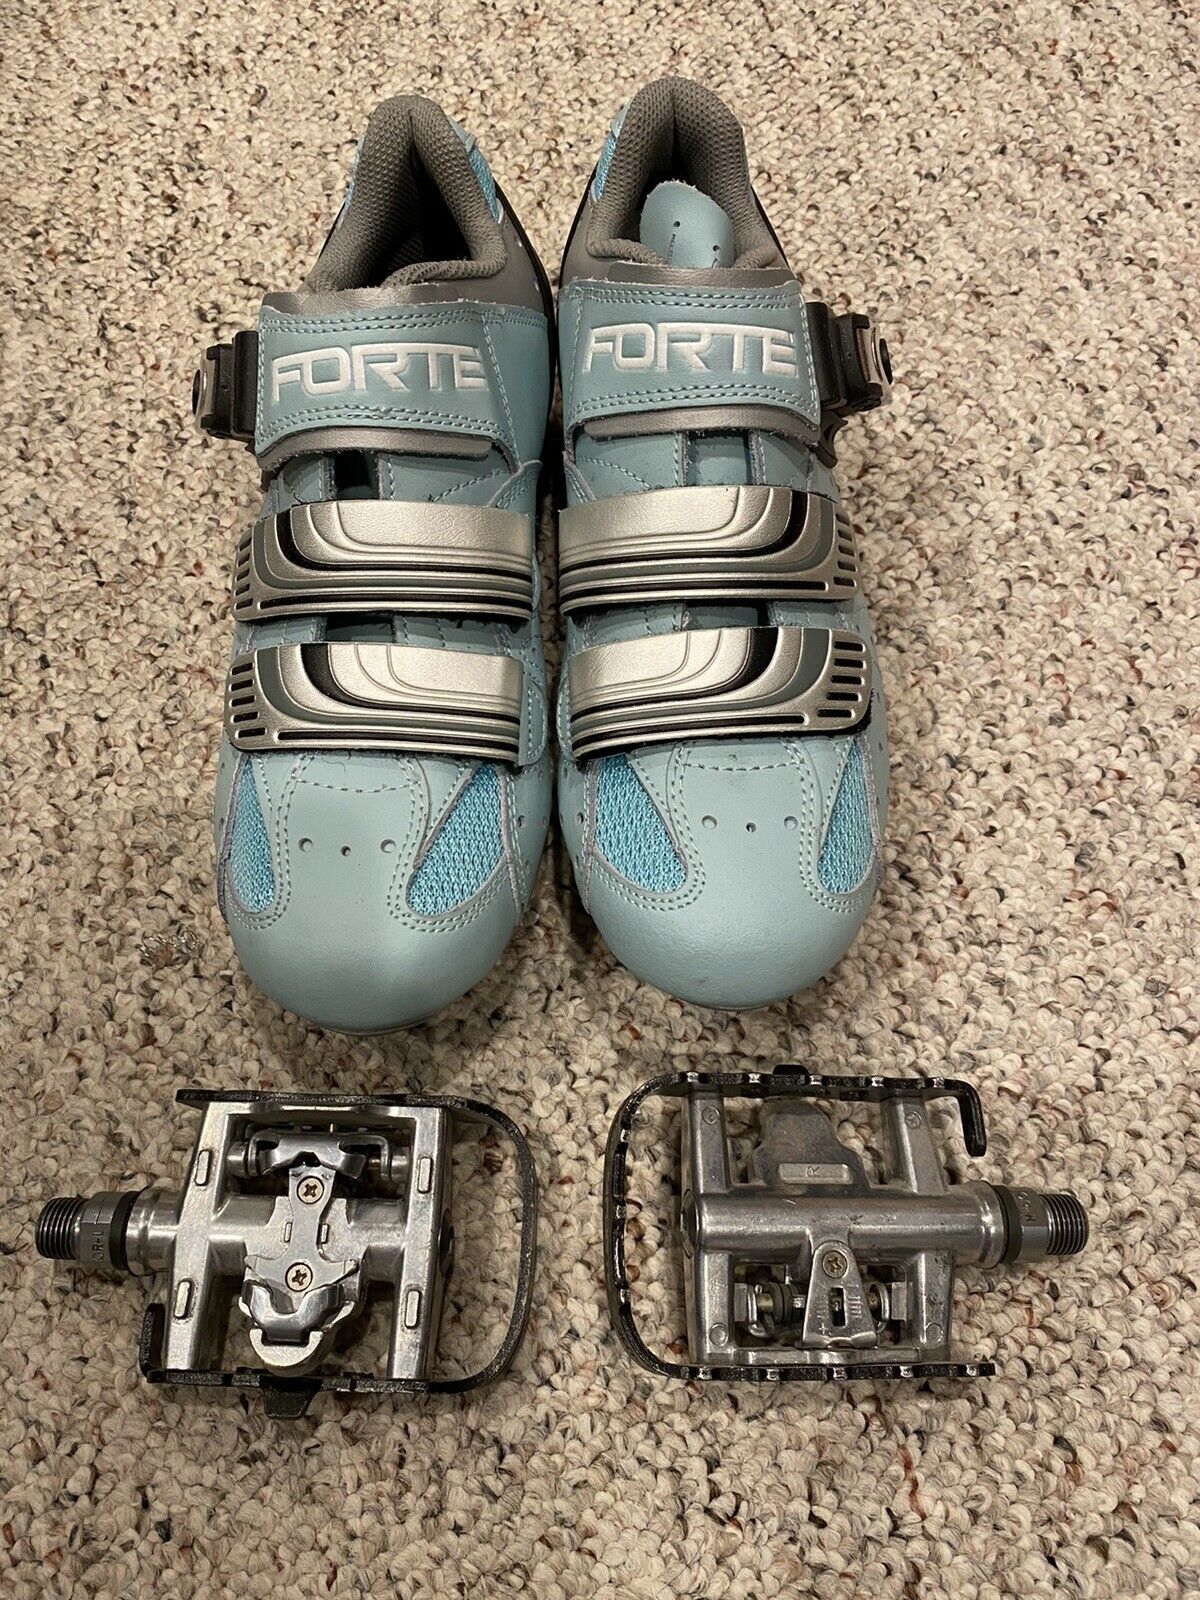 women’s mountain bike shoes and pedals